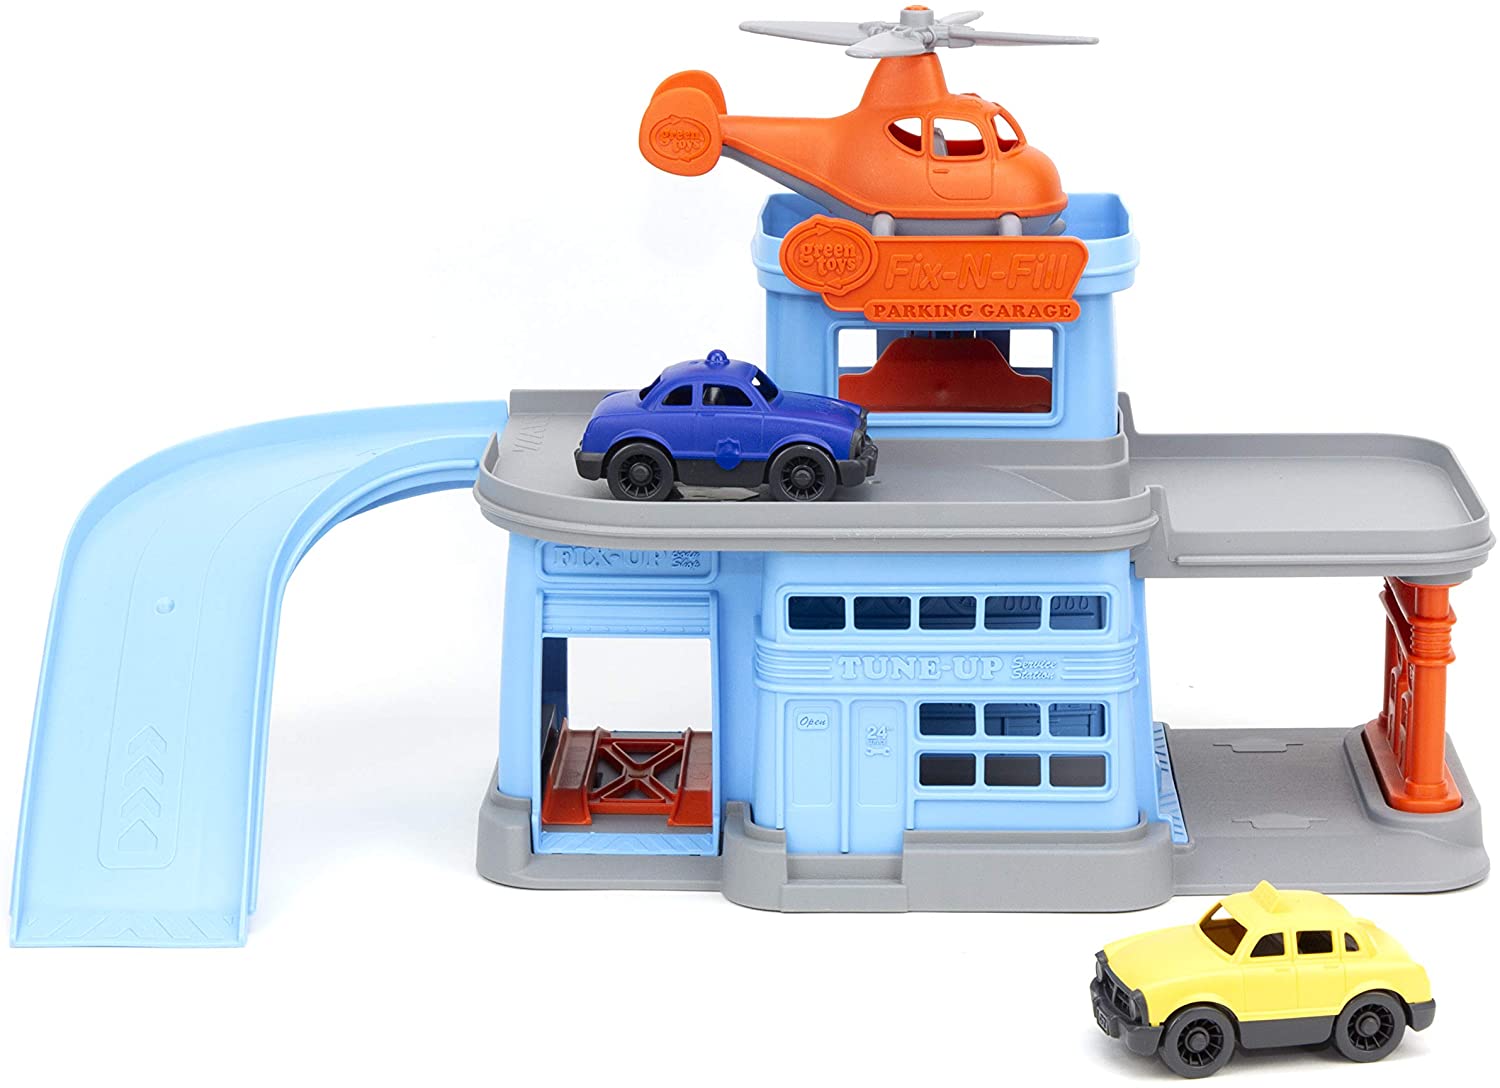 Parking Garage with 3 Vehicles - Green Toys